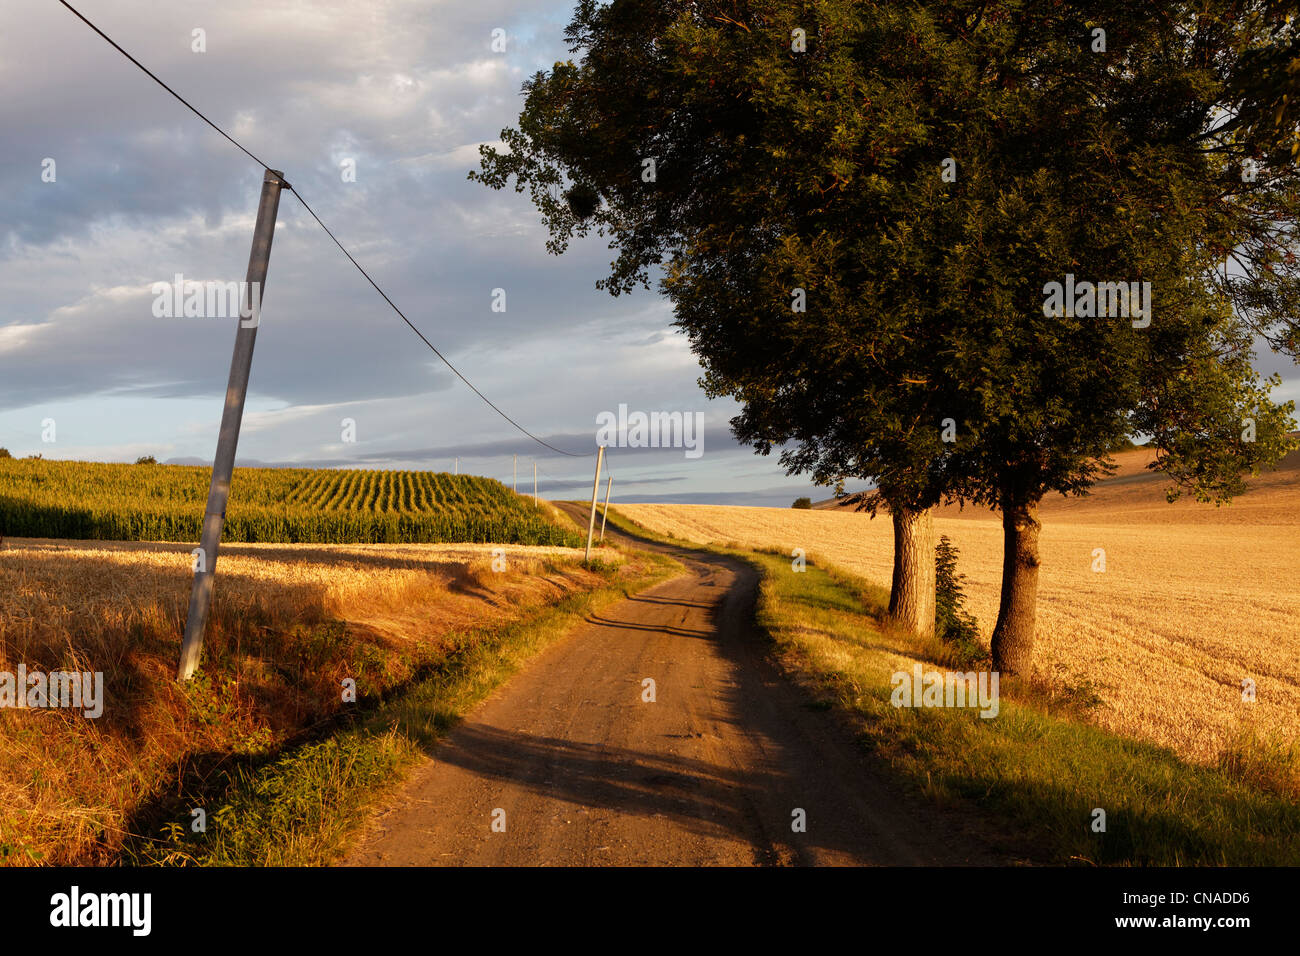 France, Puy de Dome, agricultural landscape and track Stock Photo